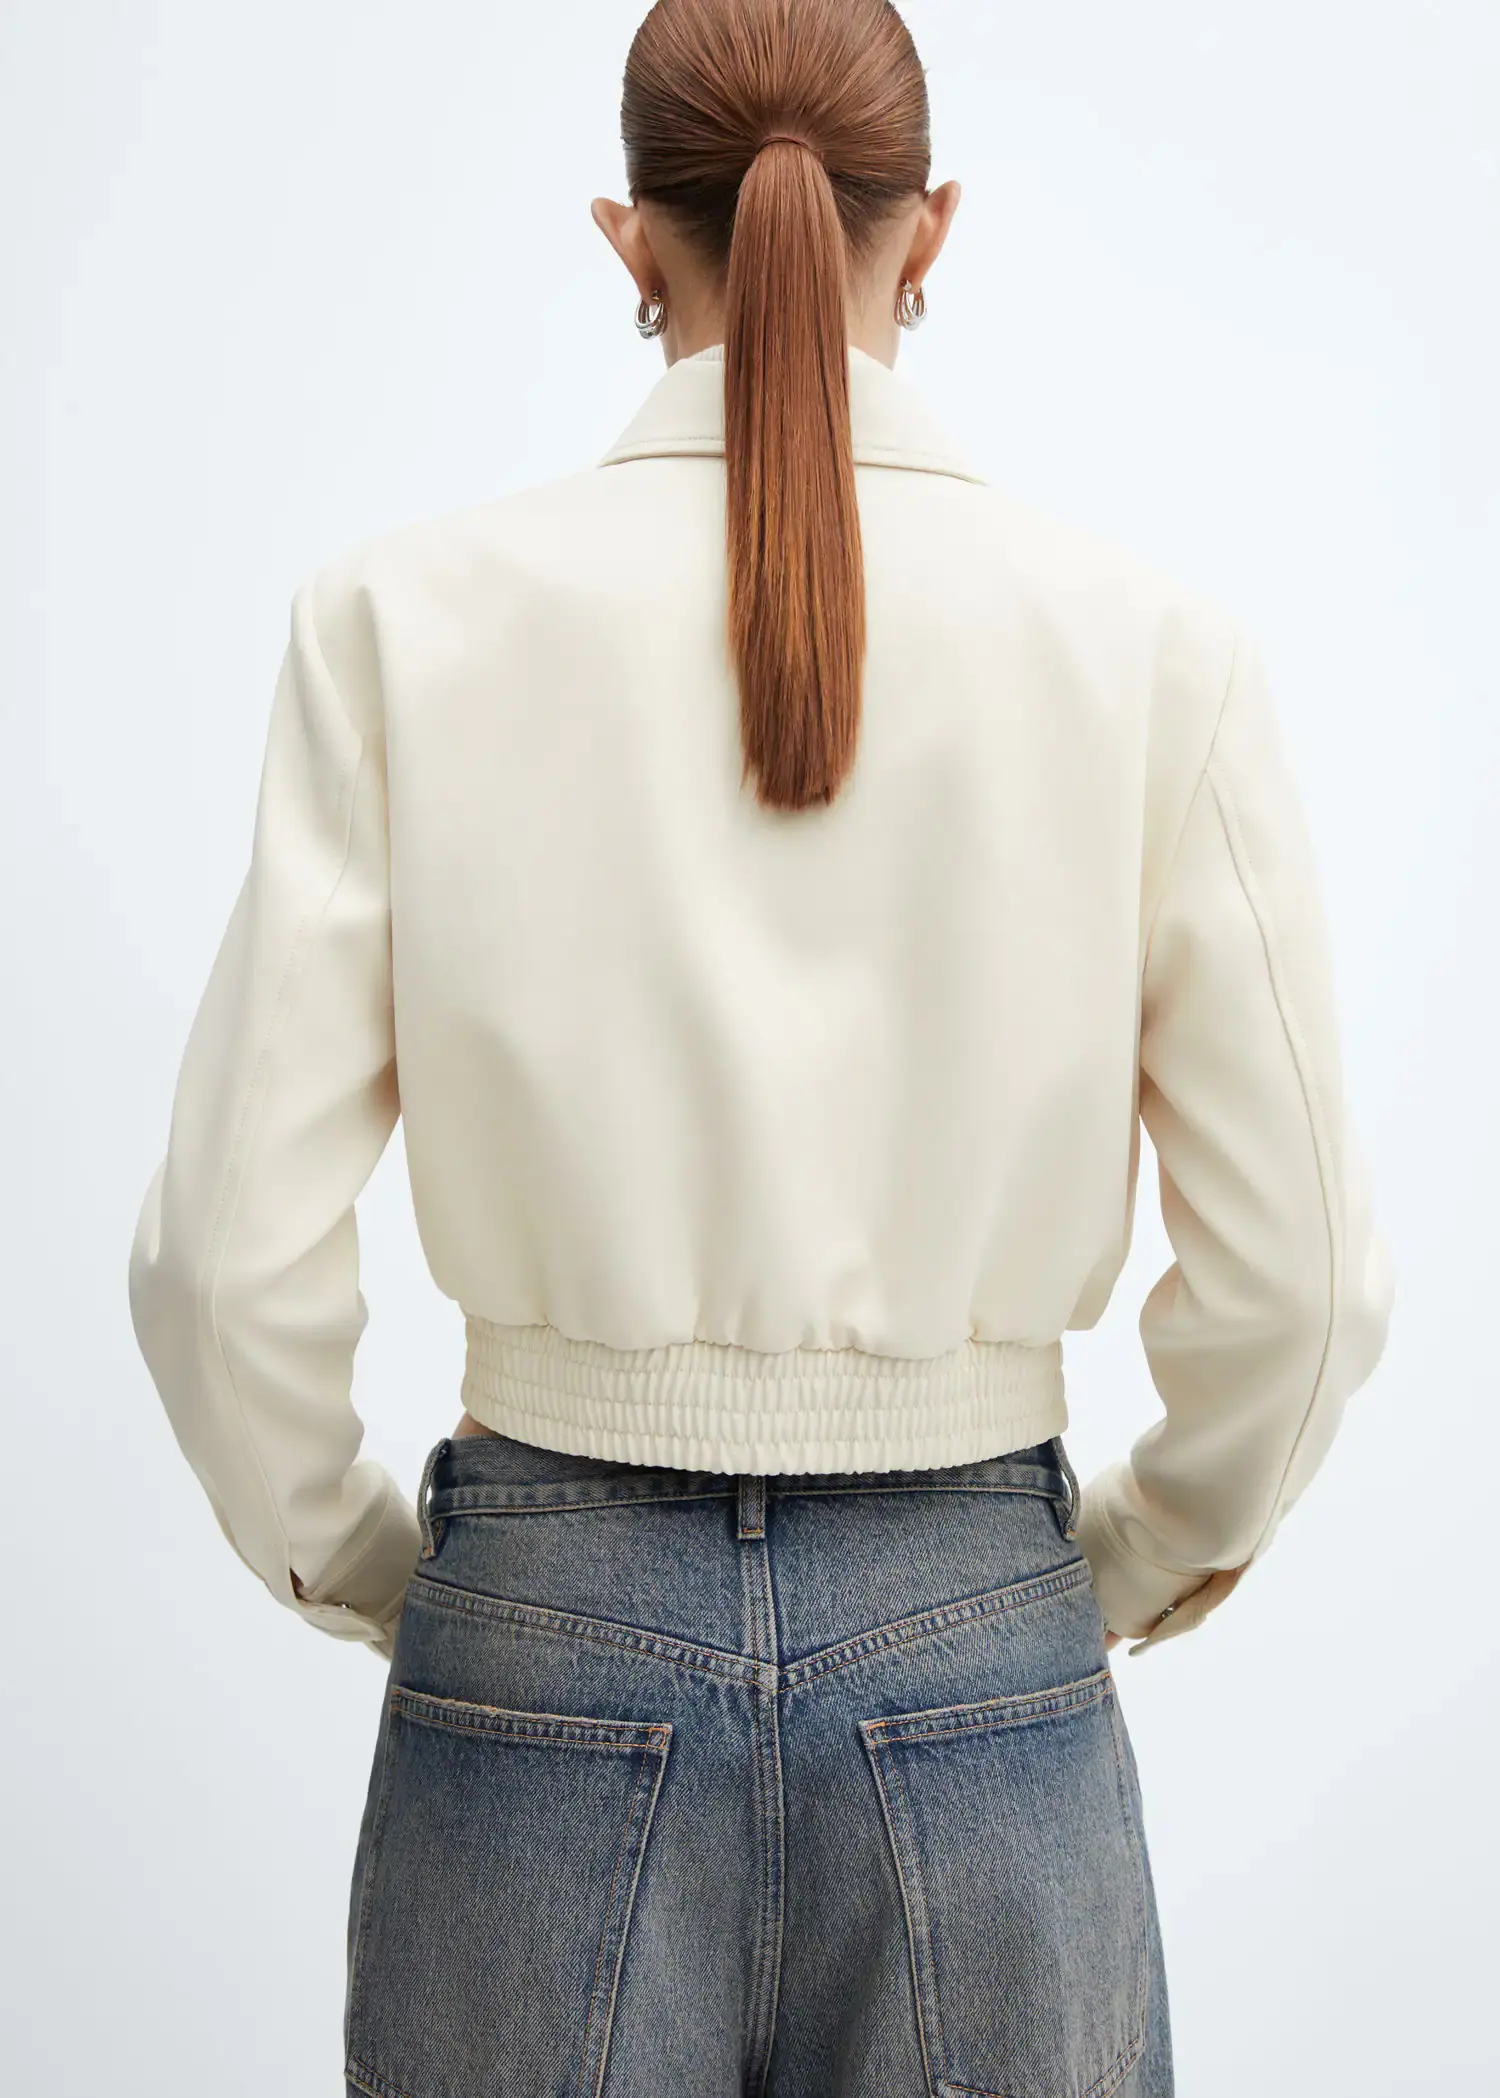 Mango Cropped jacket with shoulder pads. 3